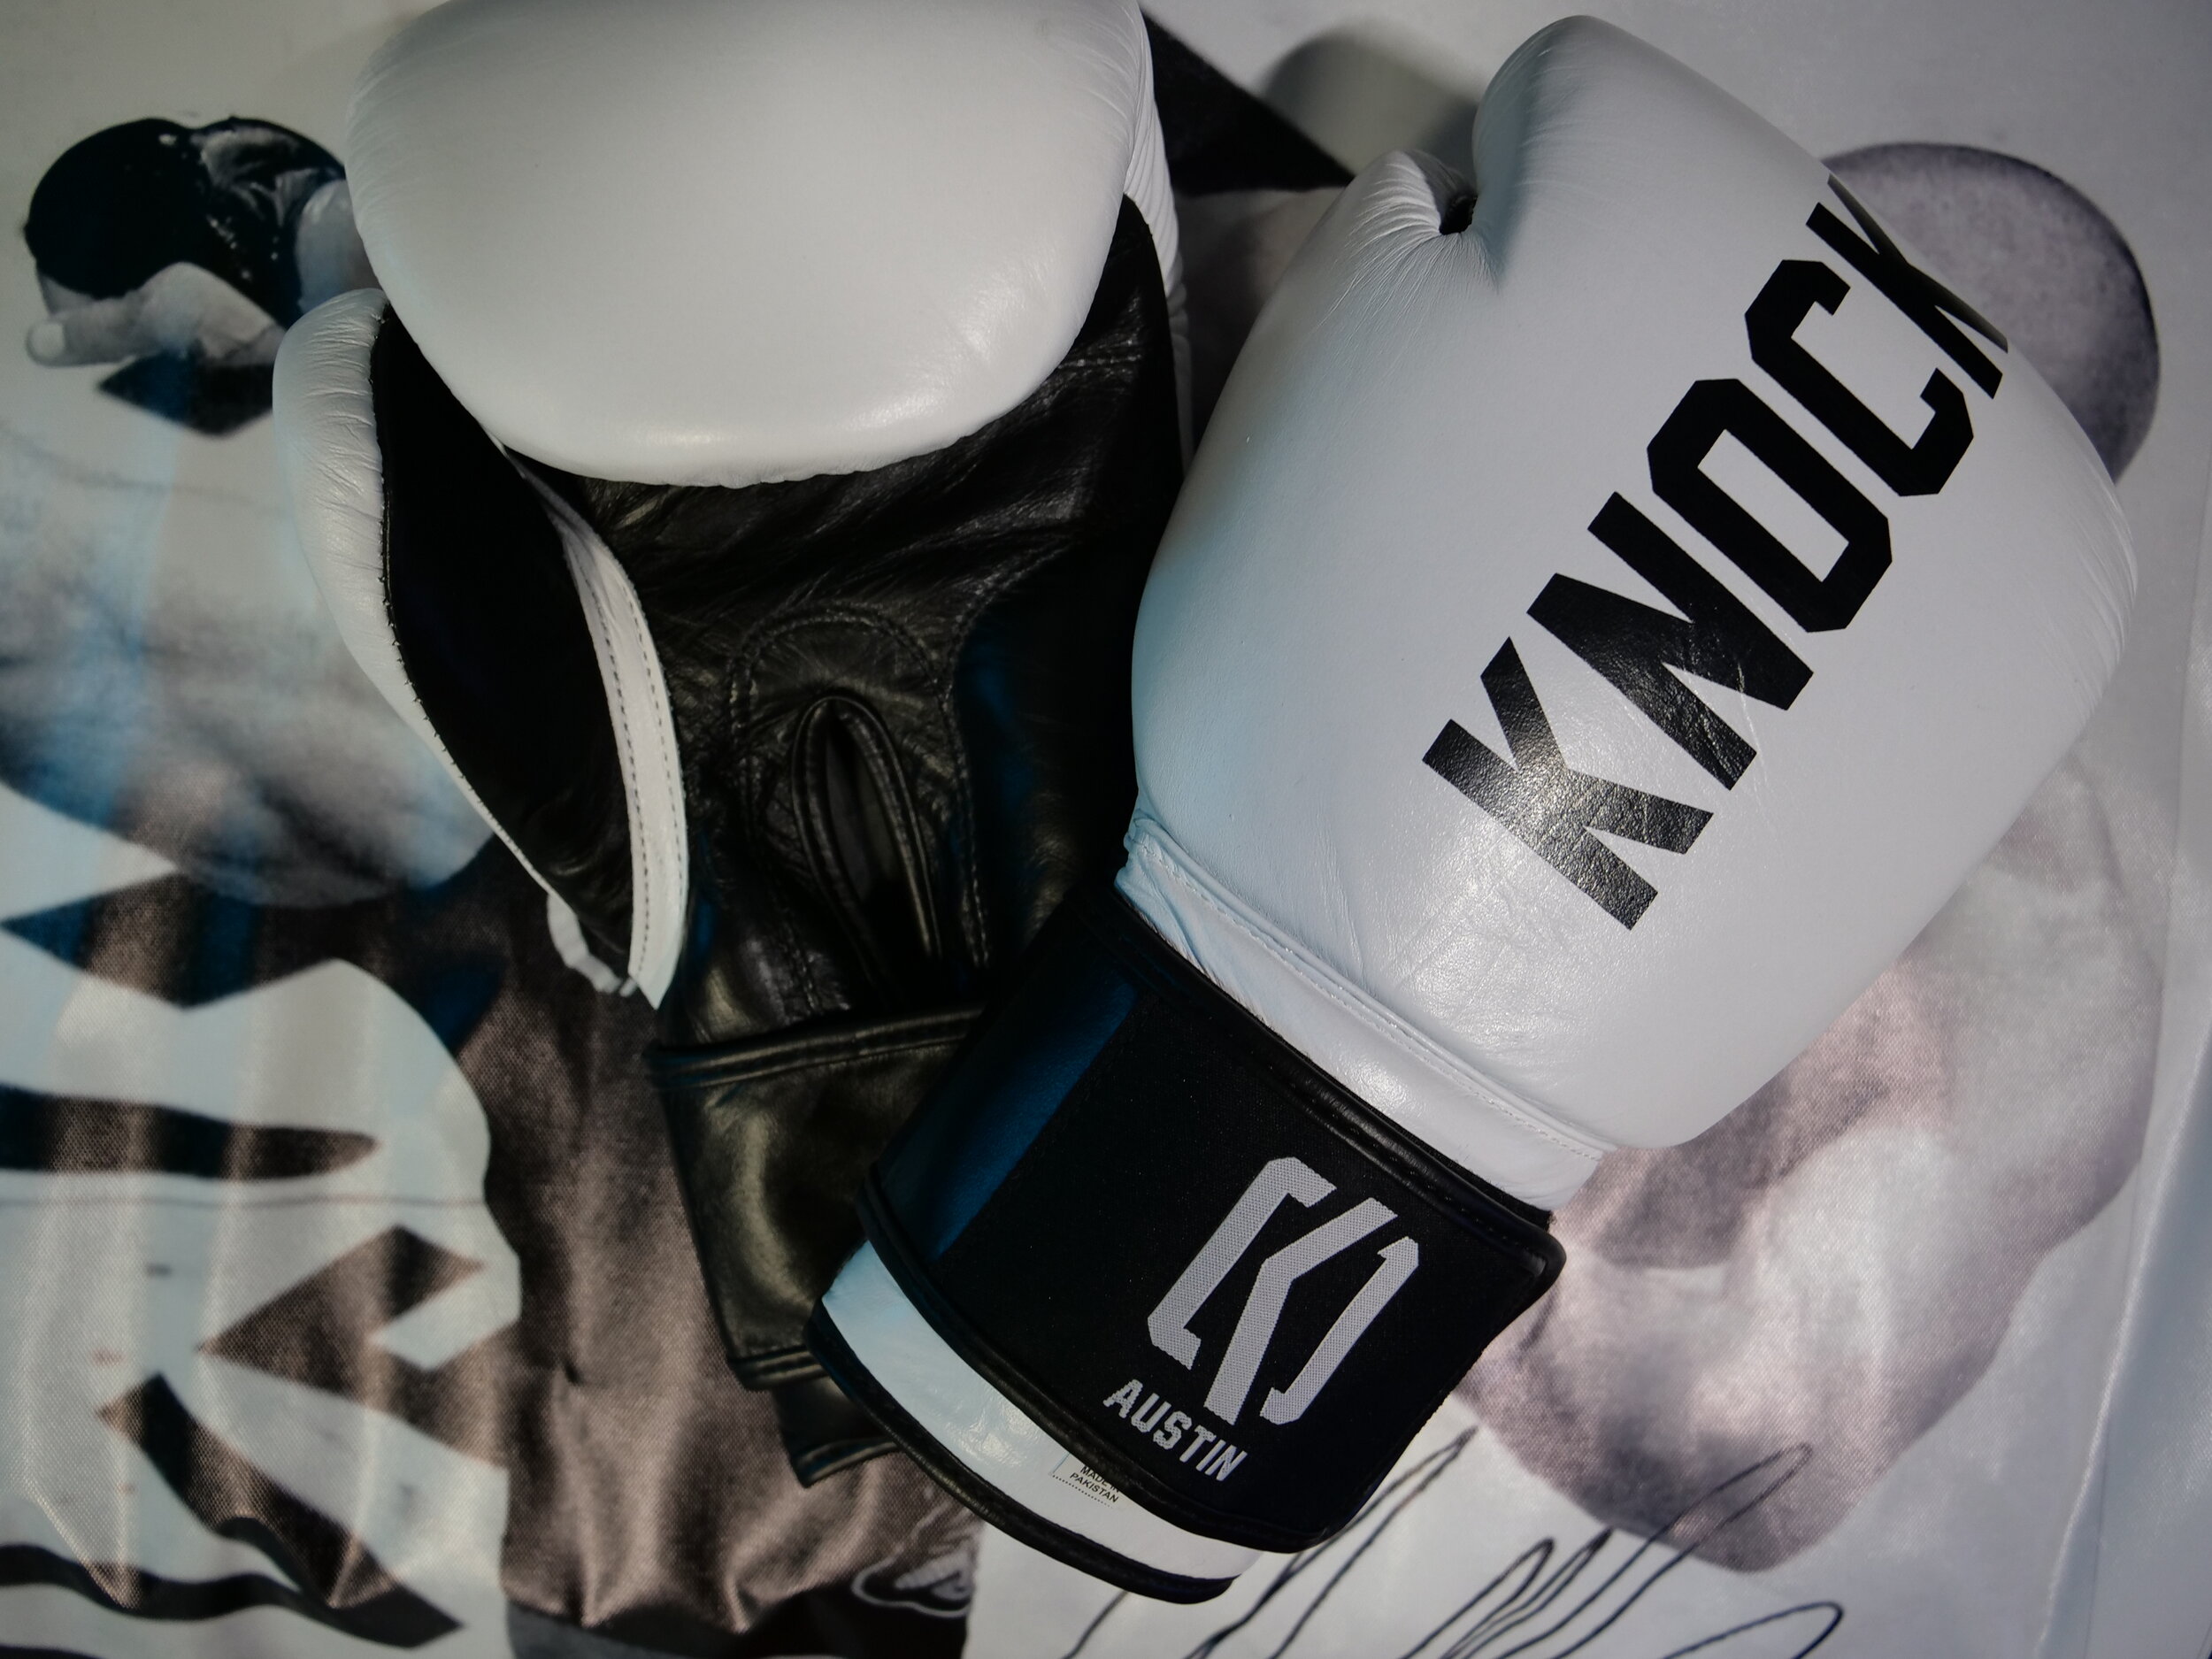 knockout Gloves Full padding Font And Back With Mesh Ventilation Panels Gloves 